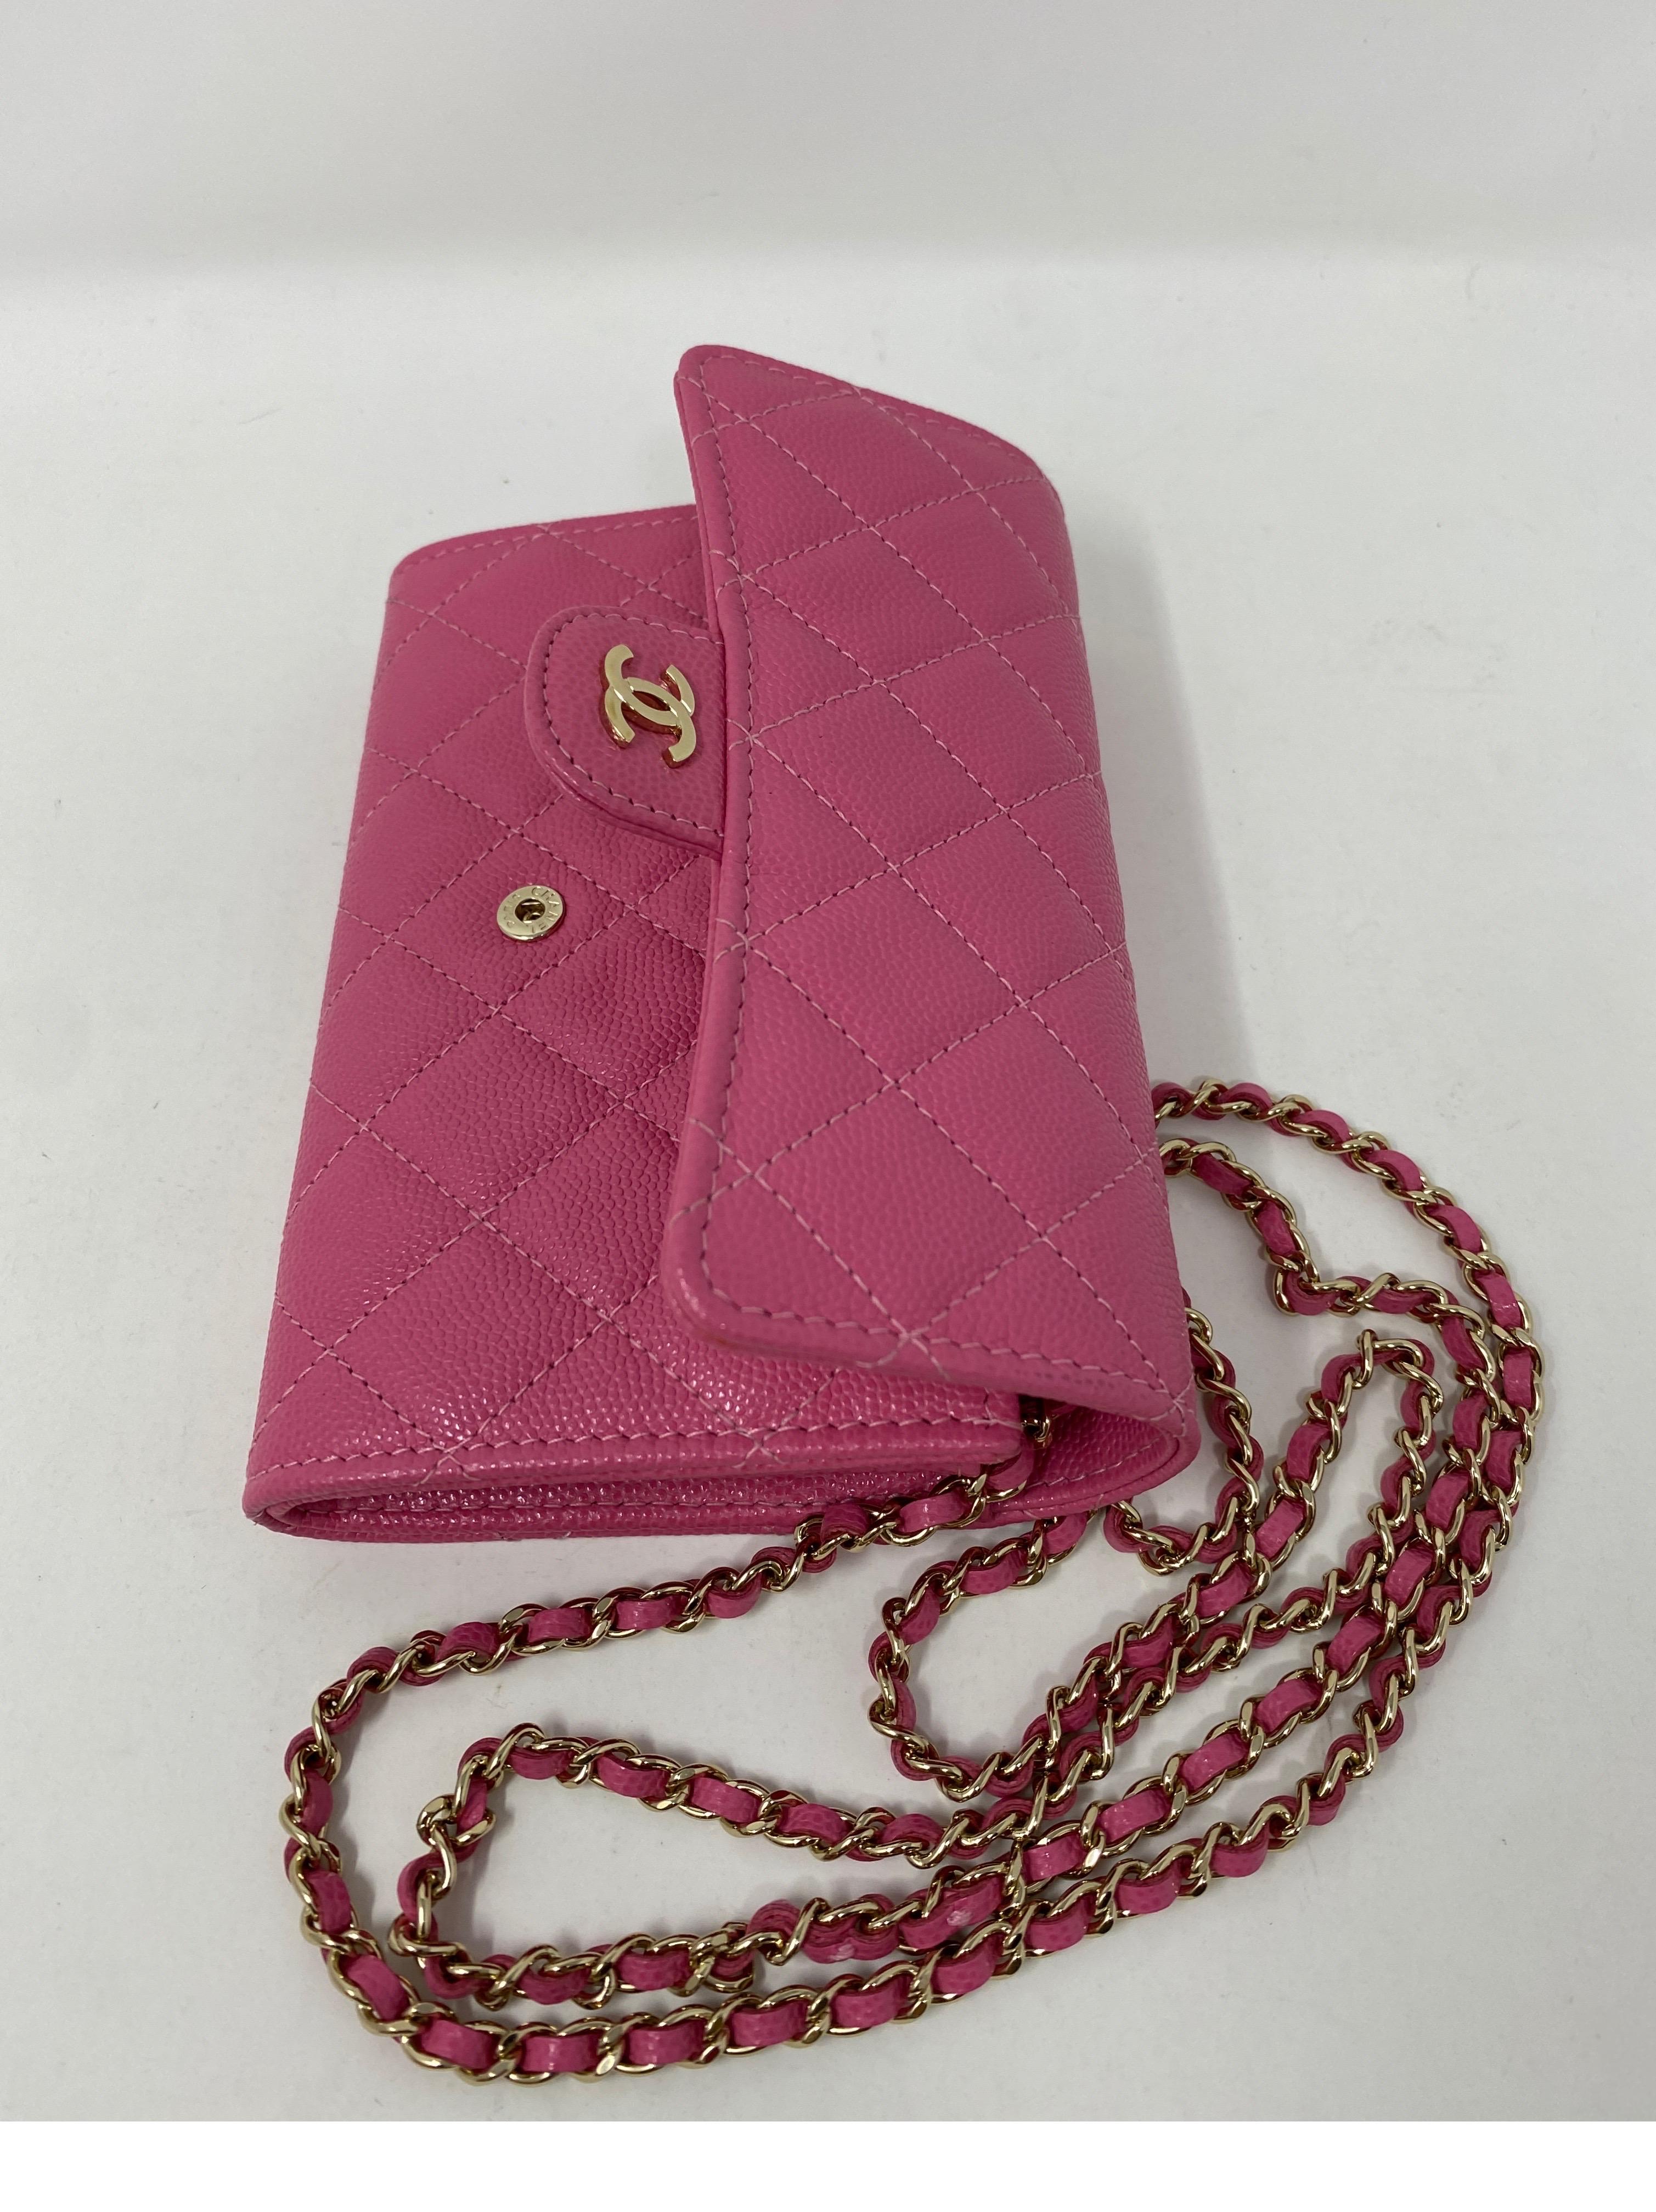 Chanel Mini Hot Pink Wallet On Chain Bag  4